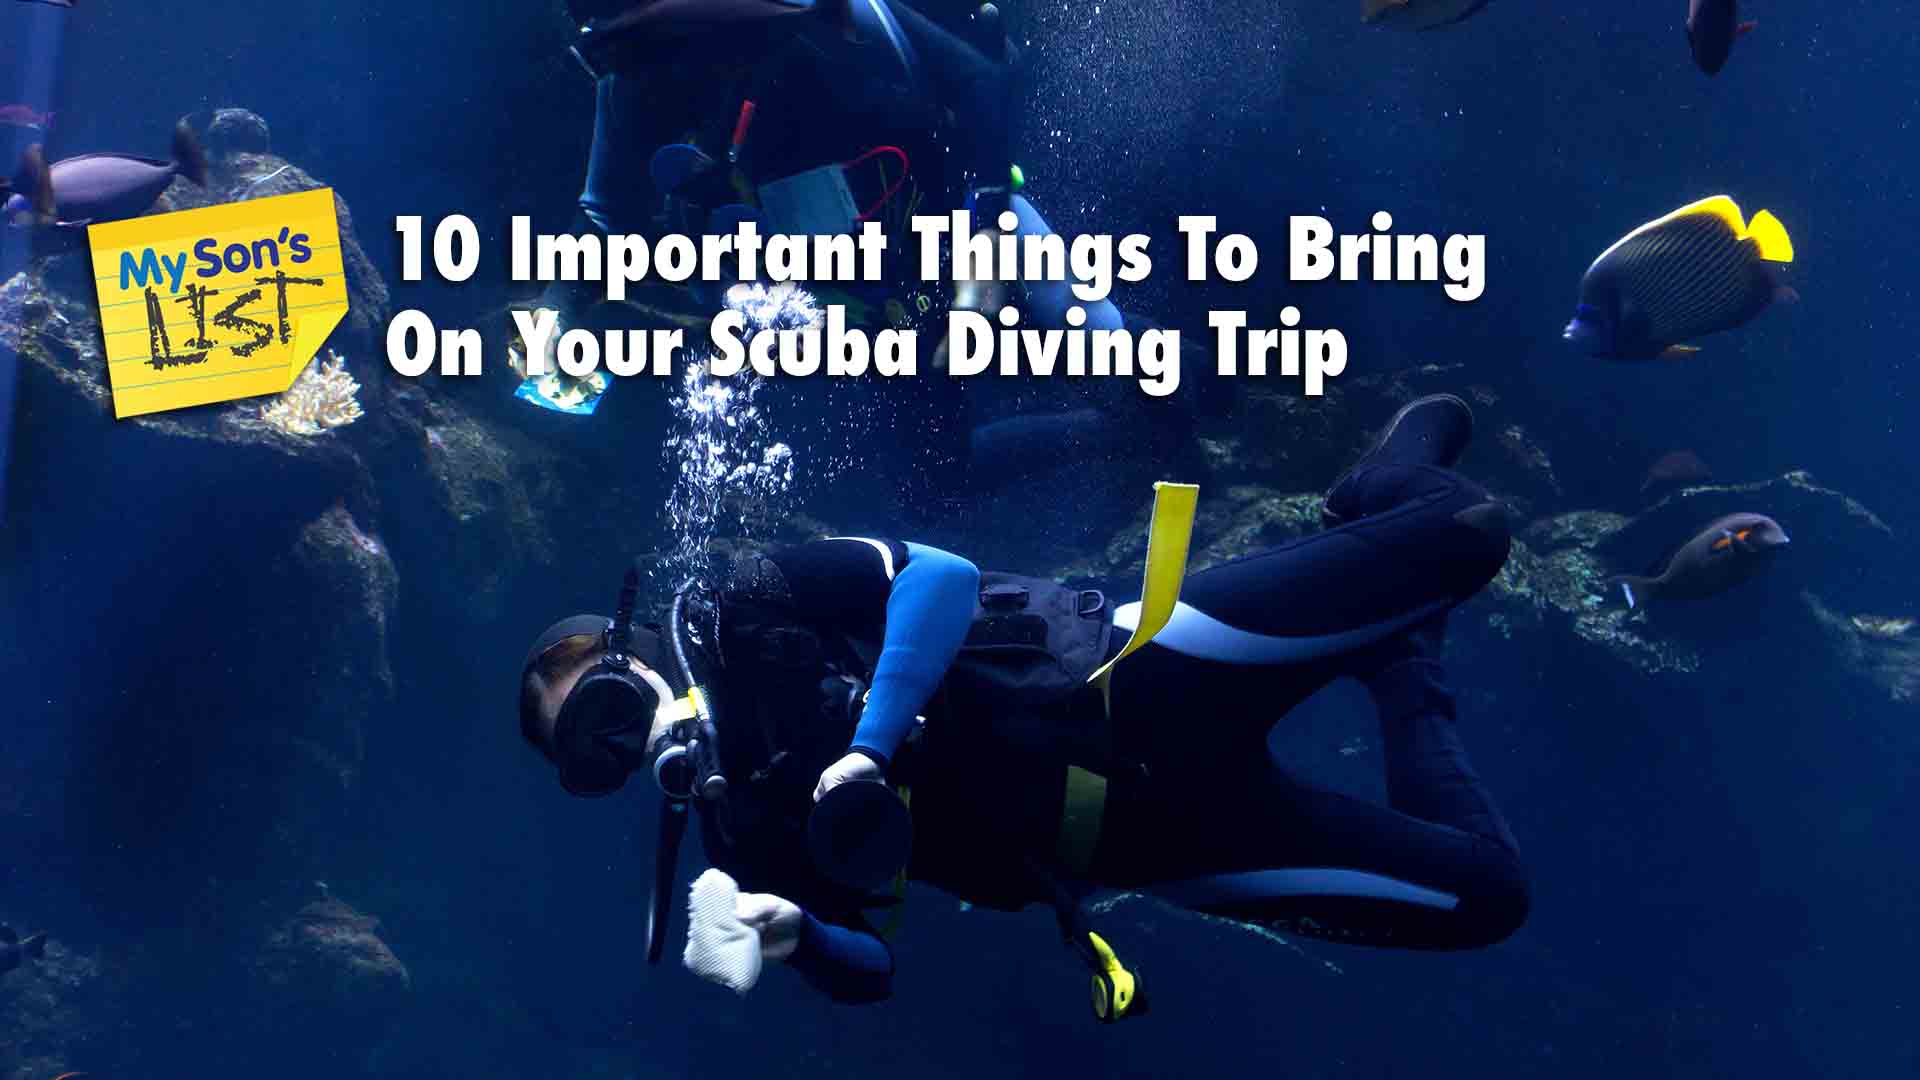 10 important things to bring on a scuba diving trip